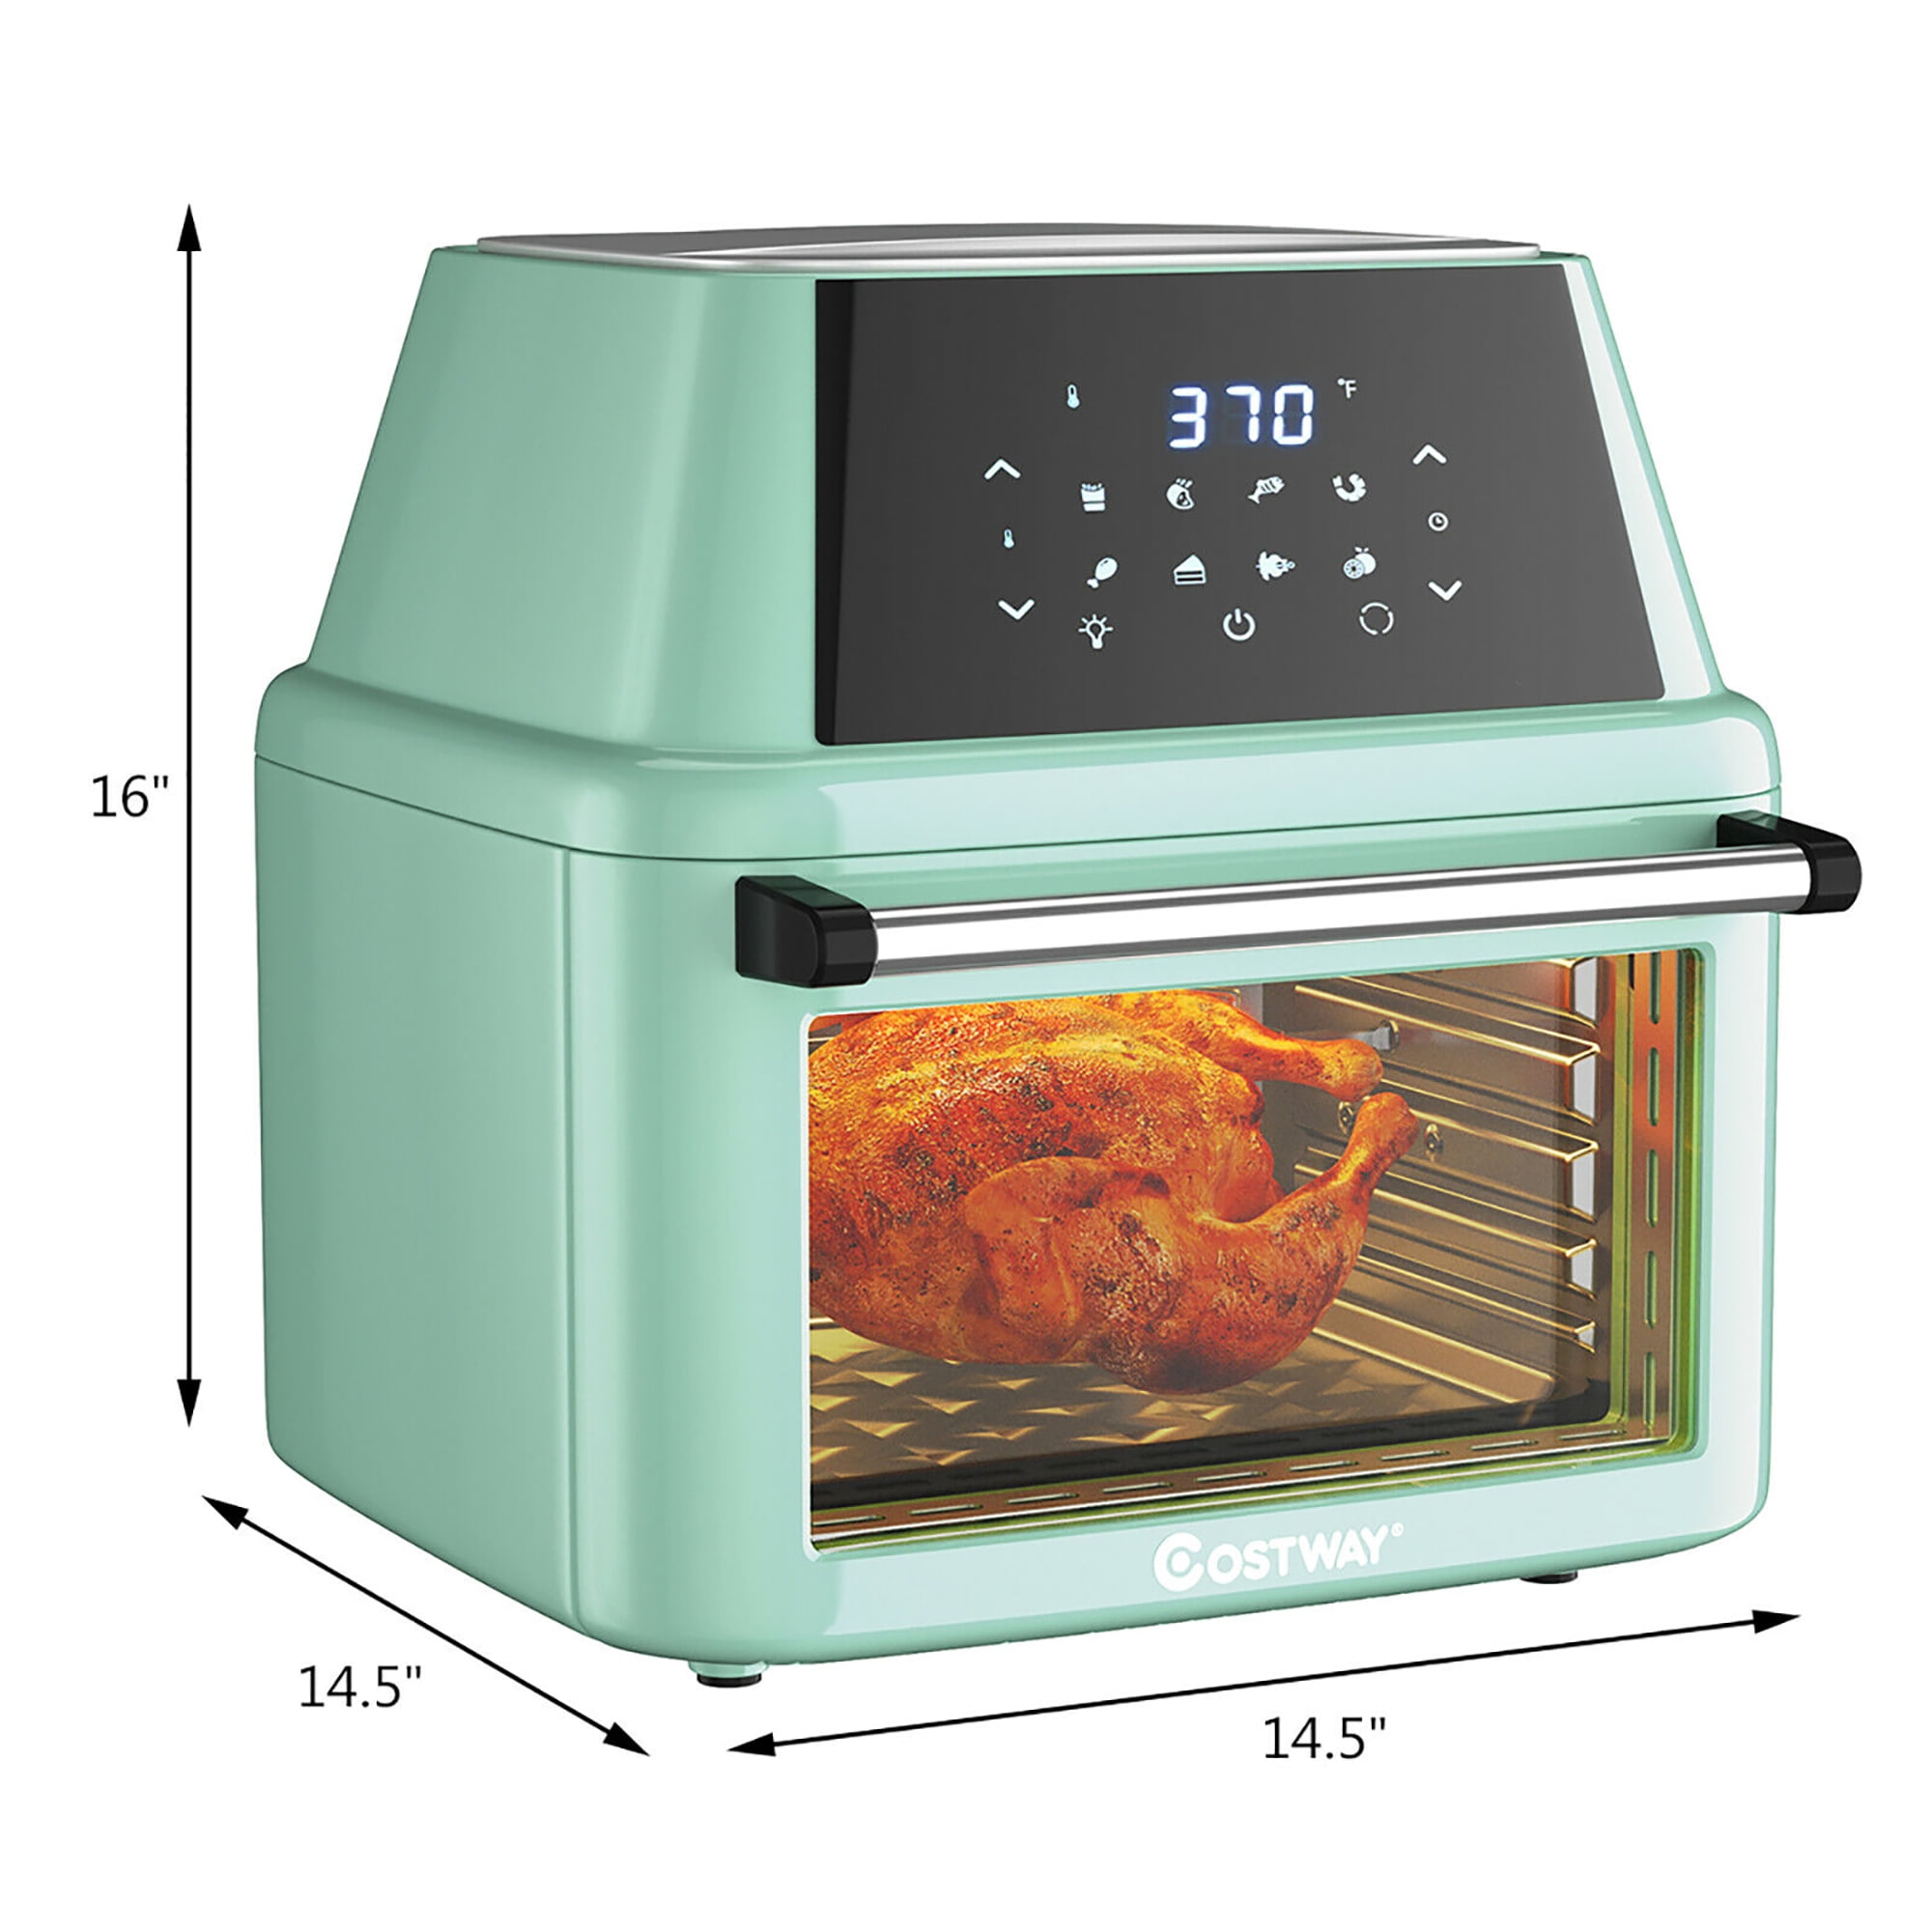 GZMR 19 qt Green Multi-Functional Air Fryer Oven 1800W Dehydrator Rotisserie,  Programmable, 8 Preset Cooking Choices, Oil-less Cooking in the Air Fryers  department at